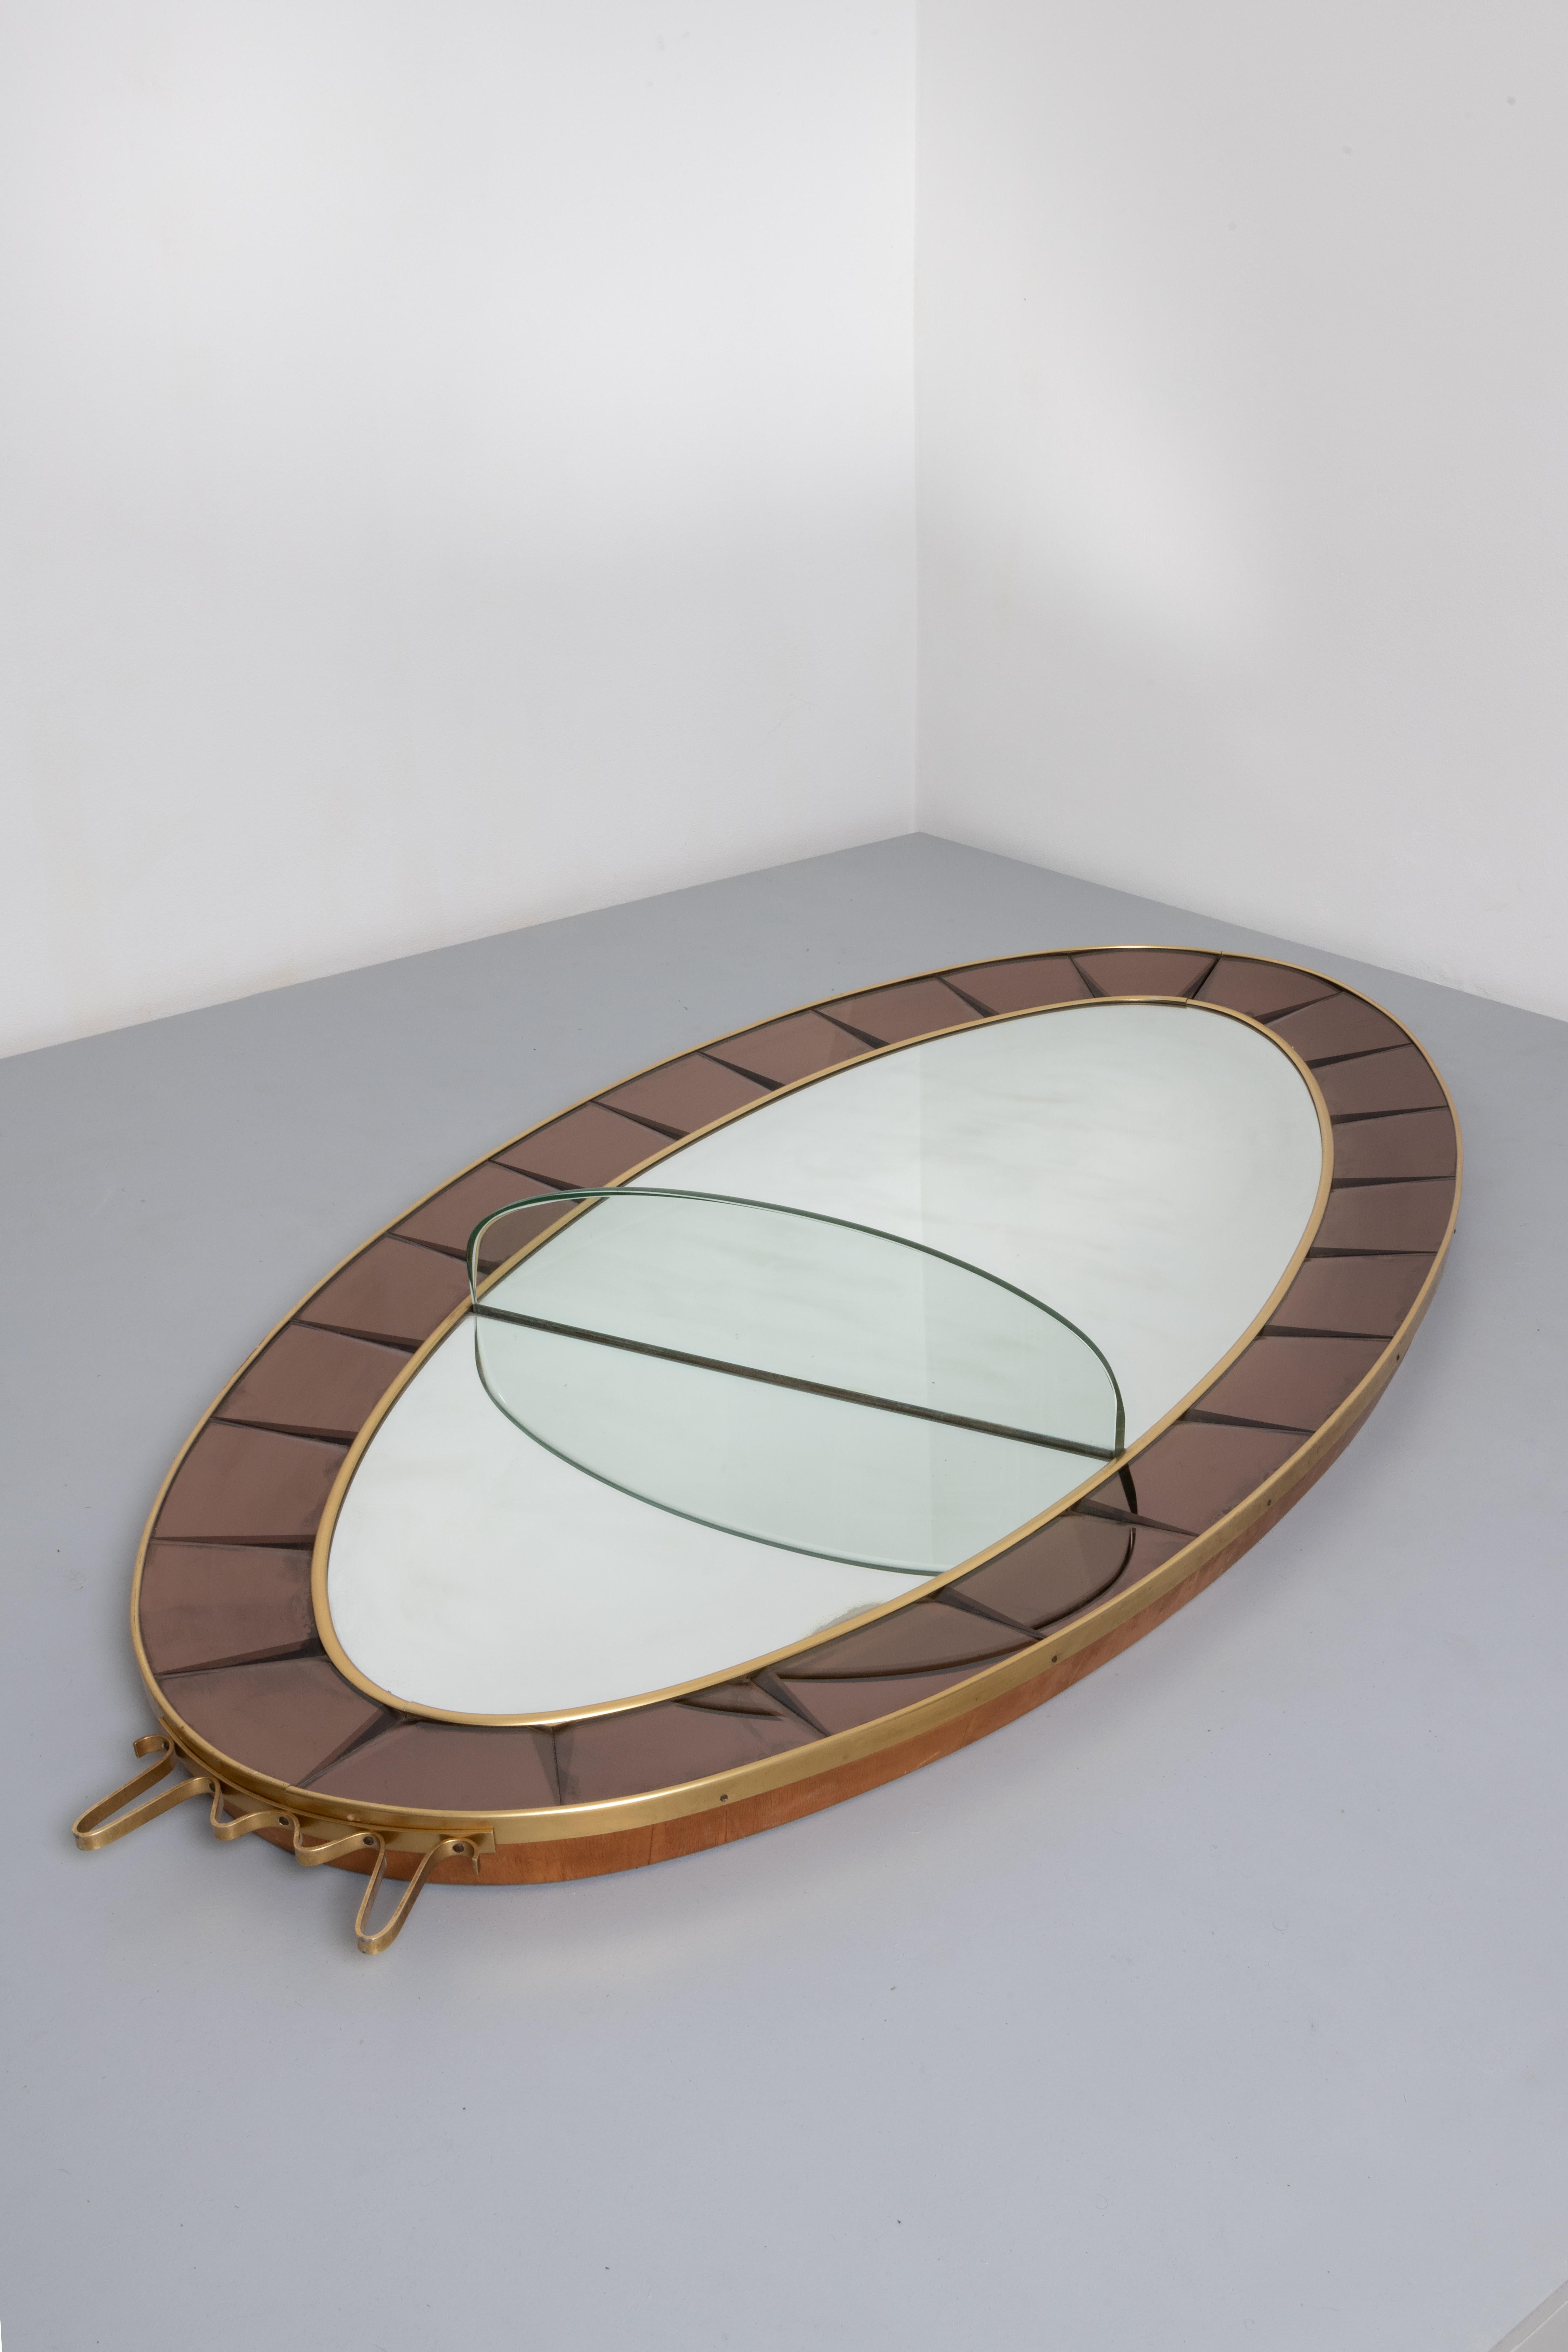 EN - Cristal Art, c. 1950. Mirror with console table. Wooden and brass frame with glass mirror, coloured bevelled crystal frame and thick bevelled crystal console table. 
Wall mirror; mounted on wooden frame with clear glass console.
Wooden frame,